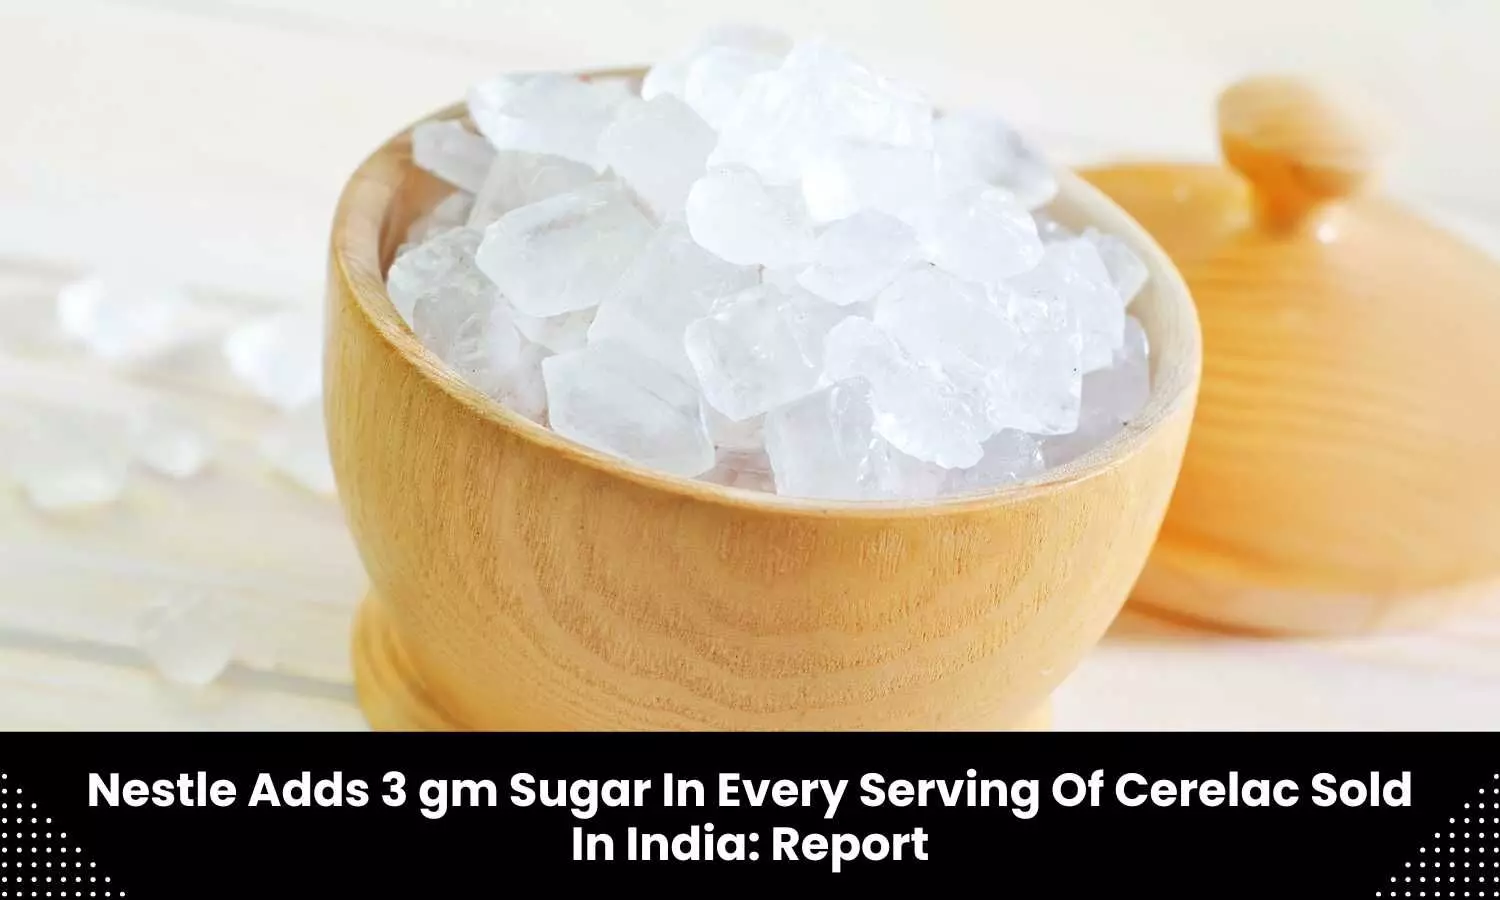 Nestle adds 3 gram sugar in every serving of Cerelac sold in India: Report